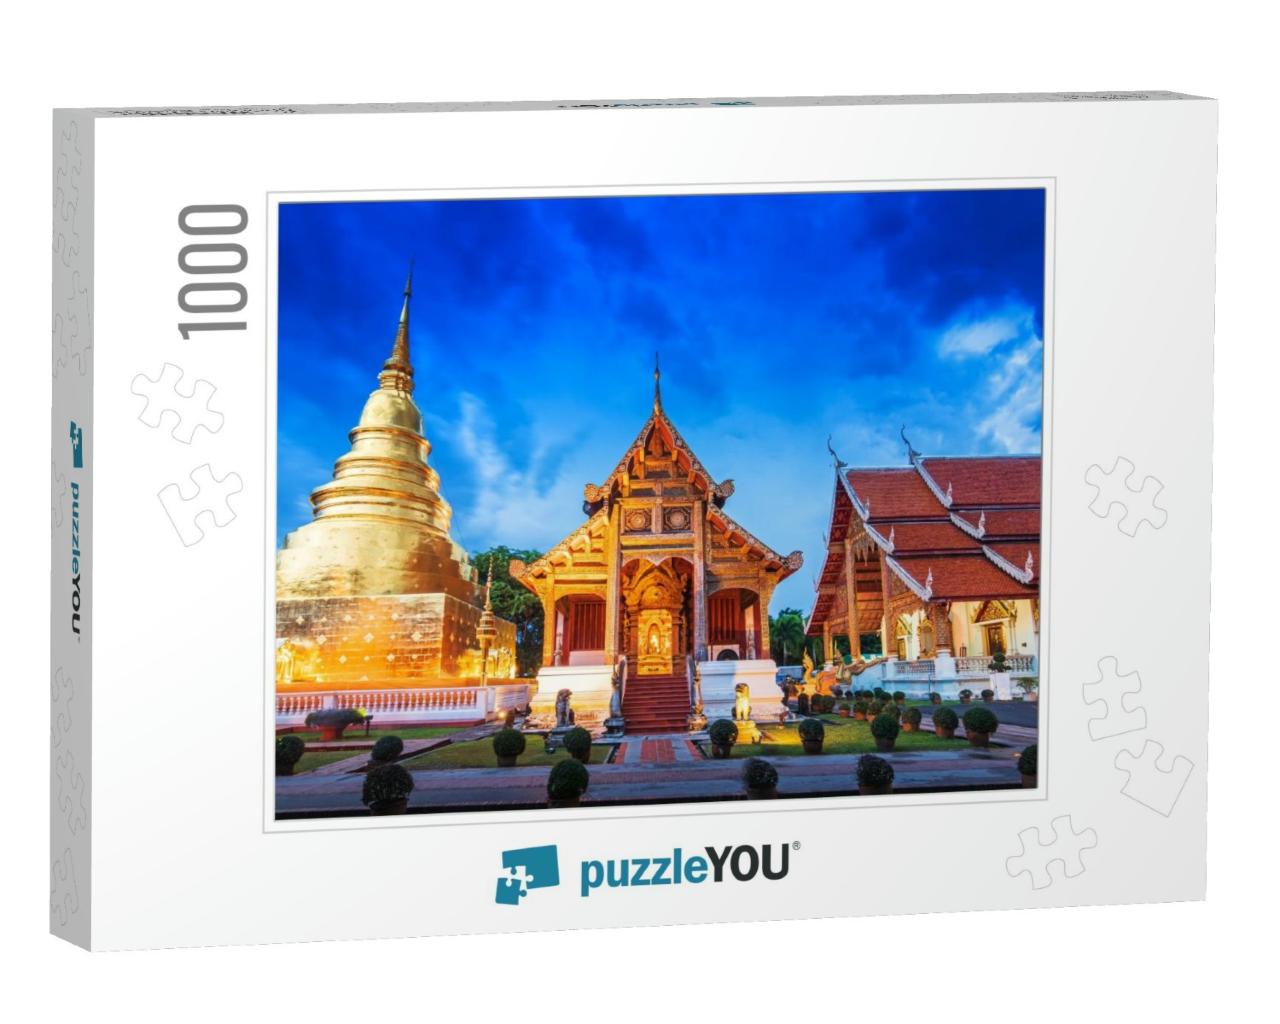 Wat Phra Singh in Chiang Mai, Thailand. Wat Phra Singh is... Jigsaw Puzzle with 1000 pieces